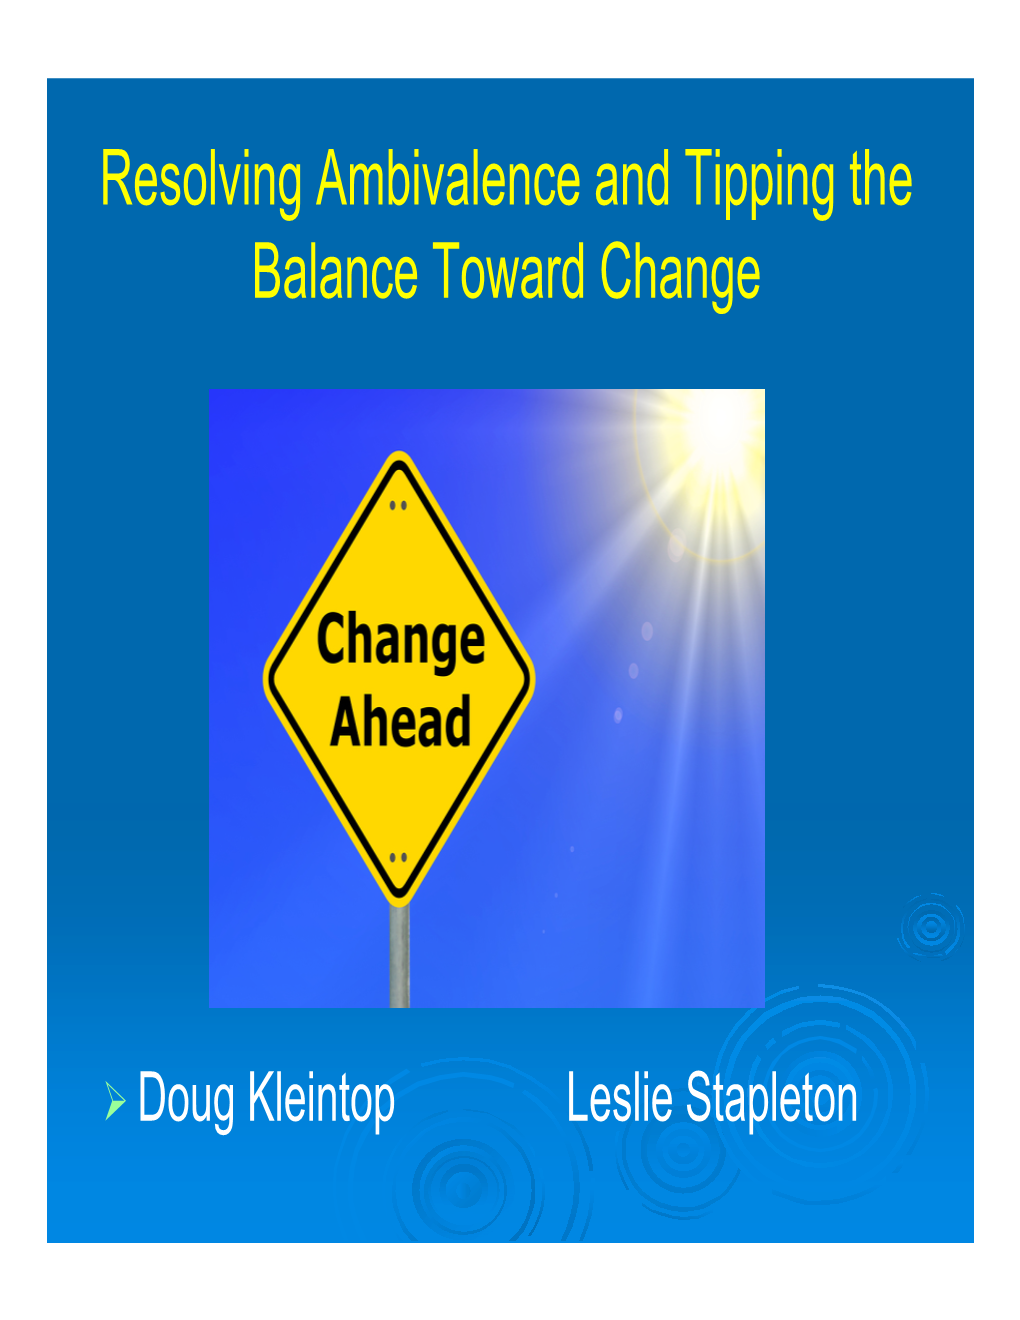 Resolving Ambivalence and Tipping the Balance Toward Change